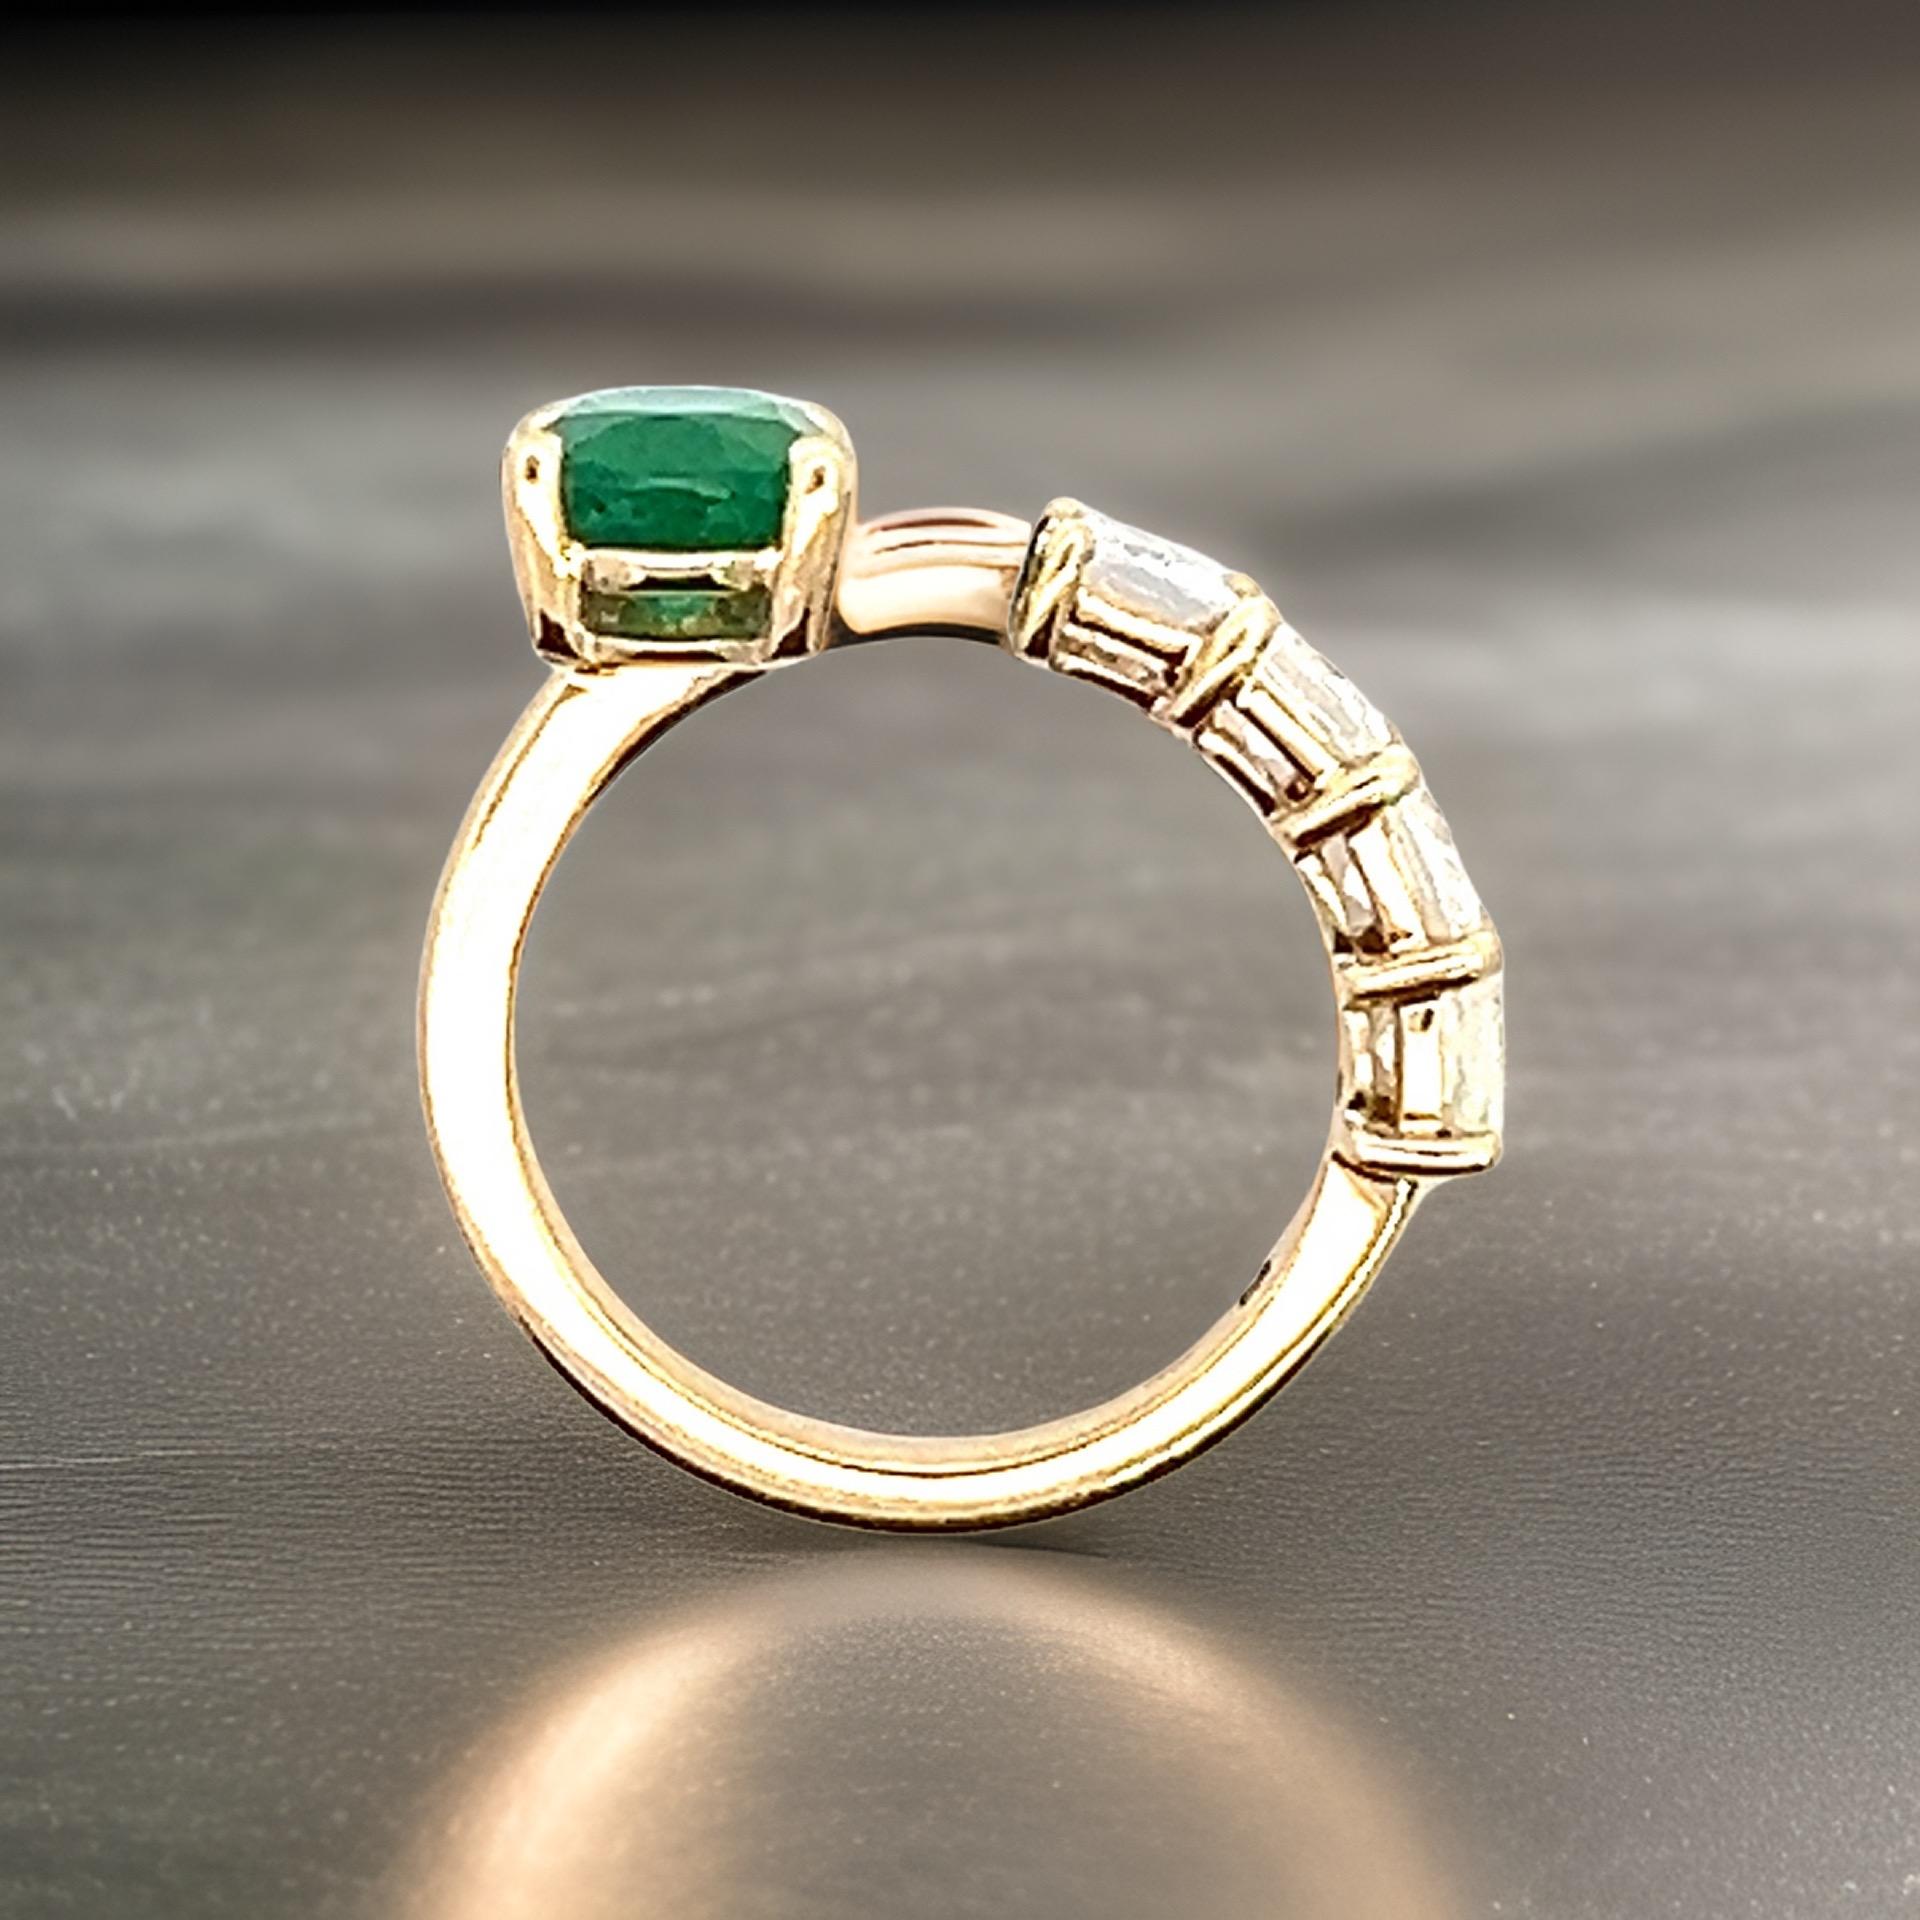 Natural Emerald and White Sapphire Ring 6.5 14k Y Gold 4.05 TCW Certified For Sale 1